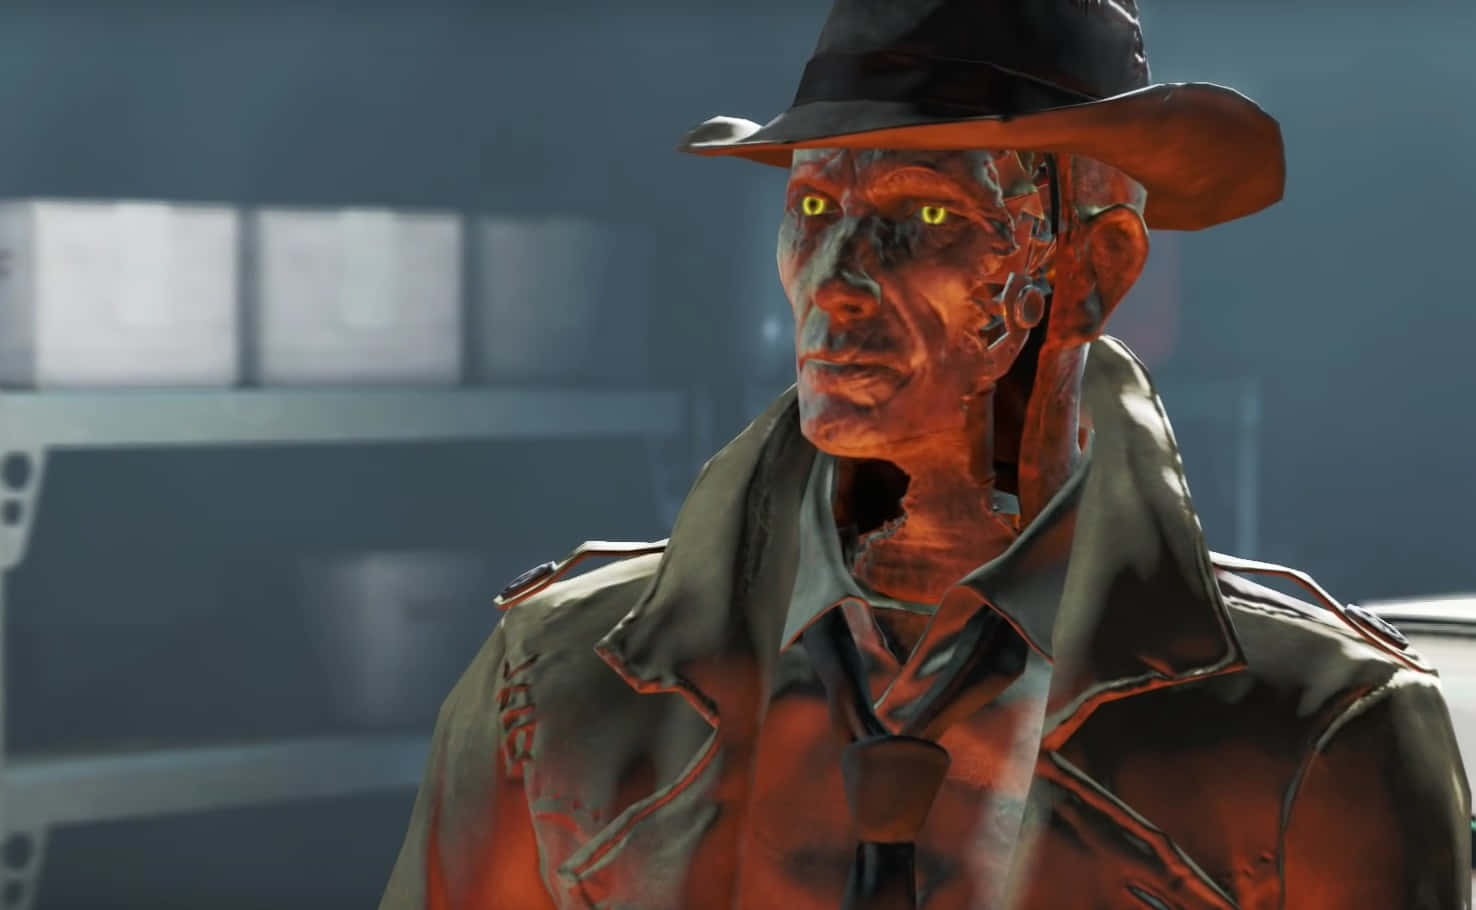 Nick Valentine, the Synth Detective of the Commonwealth in Fallout 4 Wallpaper